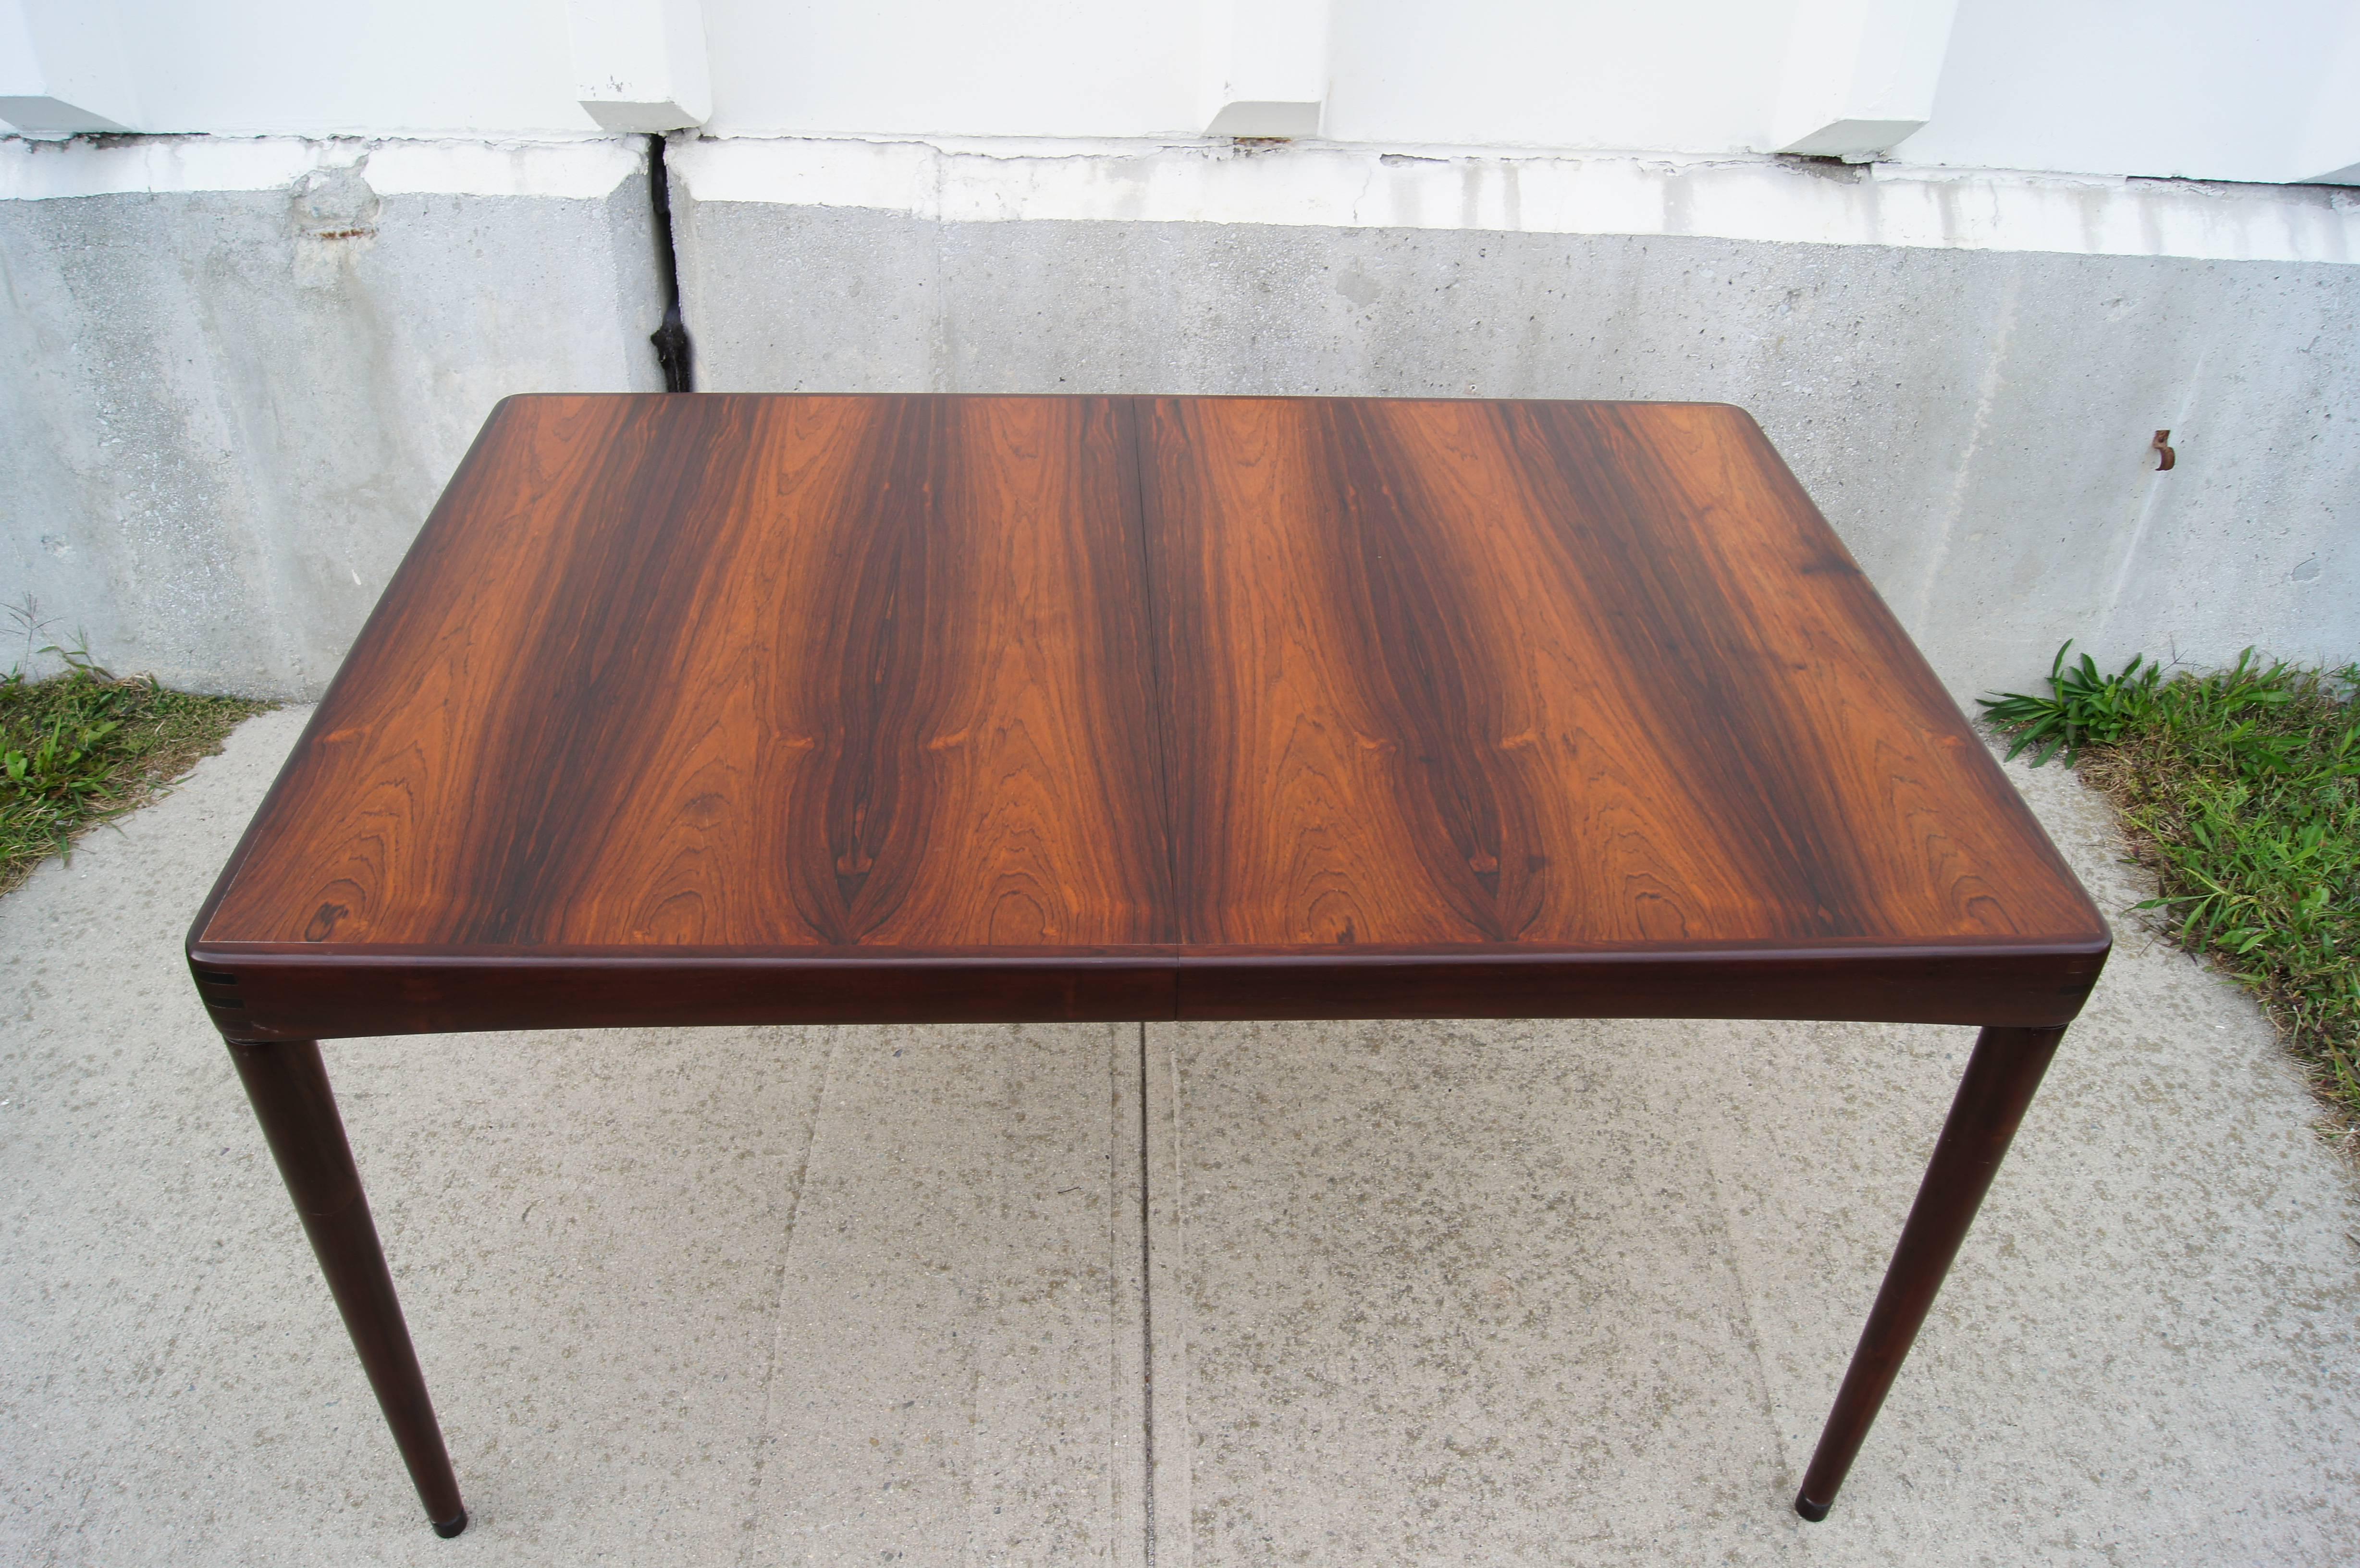 This dining table was designed by H.W. Klein and manufactured by Bramin Mobler. It is features a beautiful rosewood top with round, tapered legs and unique joinery at the corners. The table includes one 23.75″ leaf that allows it to extend up to